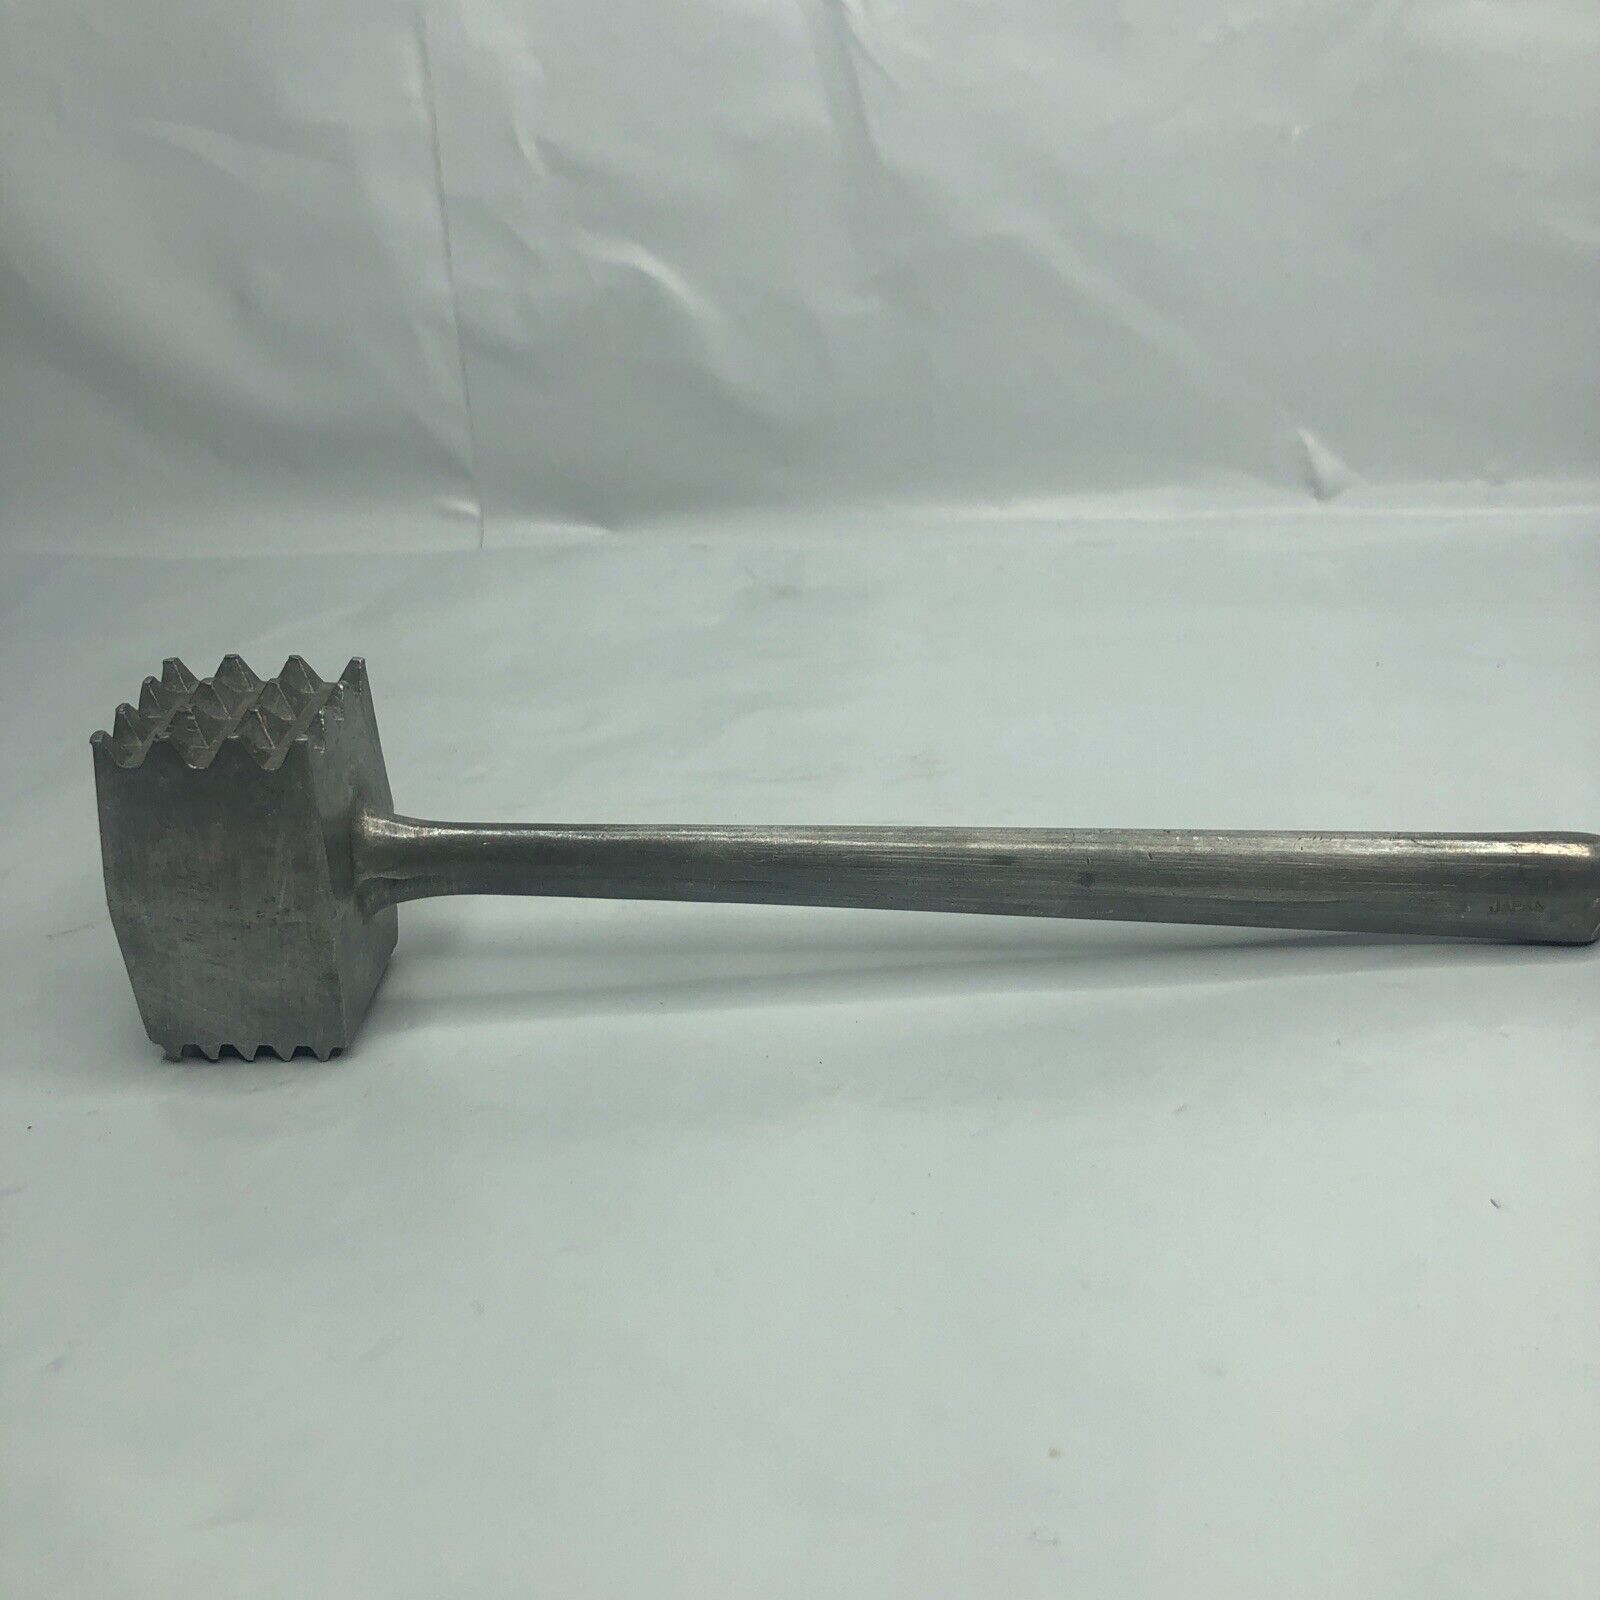 VTG TRI-WAY HEAVY CAST ALUMINUM MEAT TENDERIZER Made In Japan